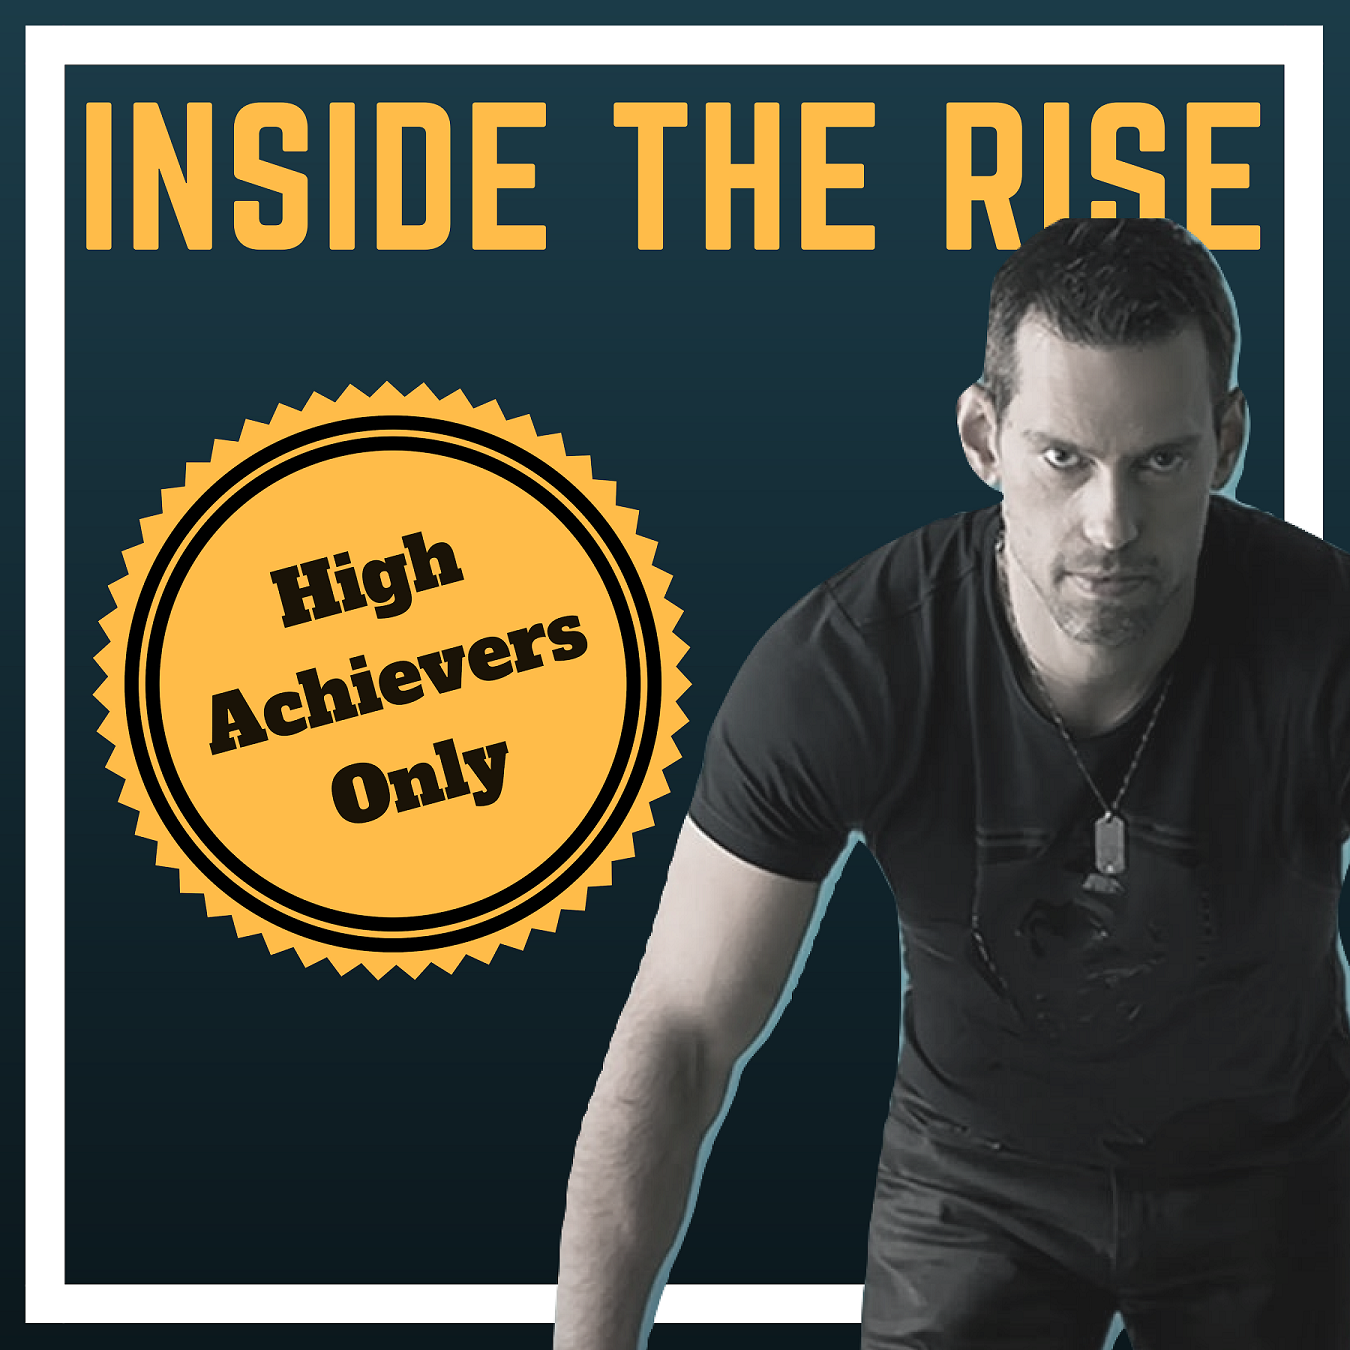 The interview just before Quest Nutrition founder Tom Bilyeu started Impact Theory - he explains how to build your identify to create the life you've always wanted on Inside The Rise Podcast with JC Cross